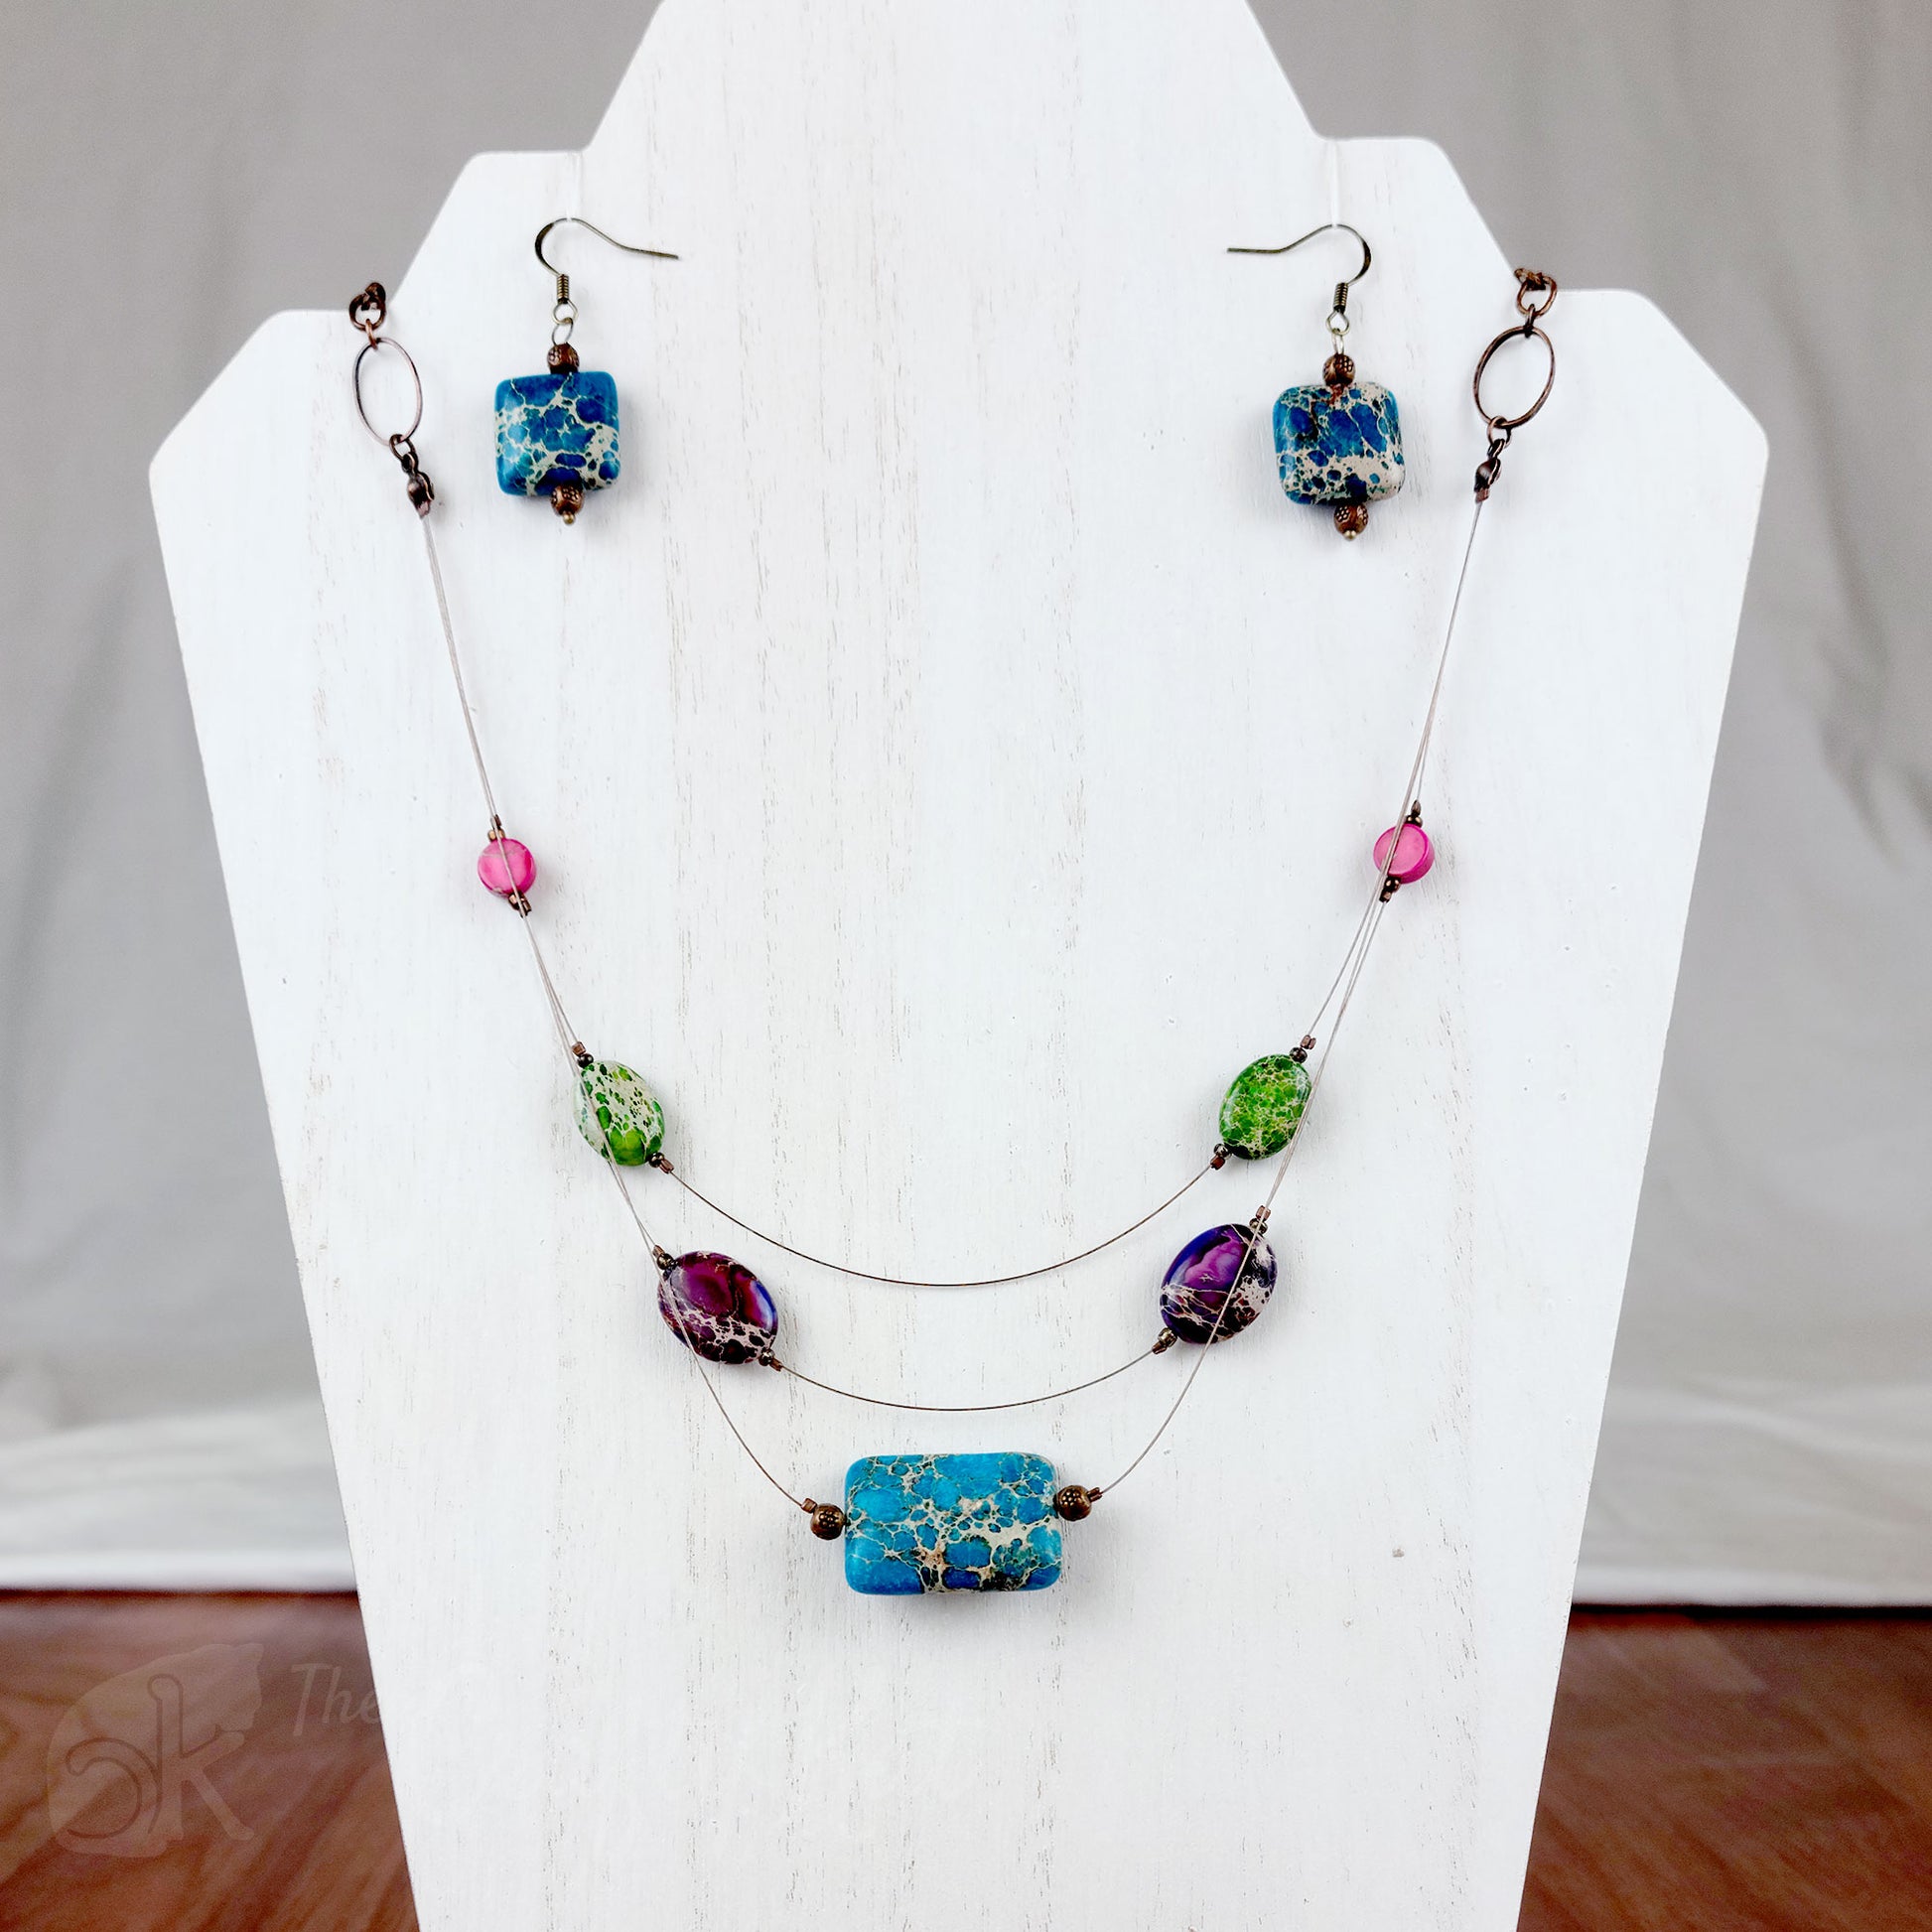 Three-layered tigertail necklace features geometric beads dyed blue, pink, green, and purple; antique copper fittings